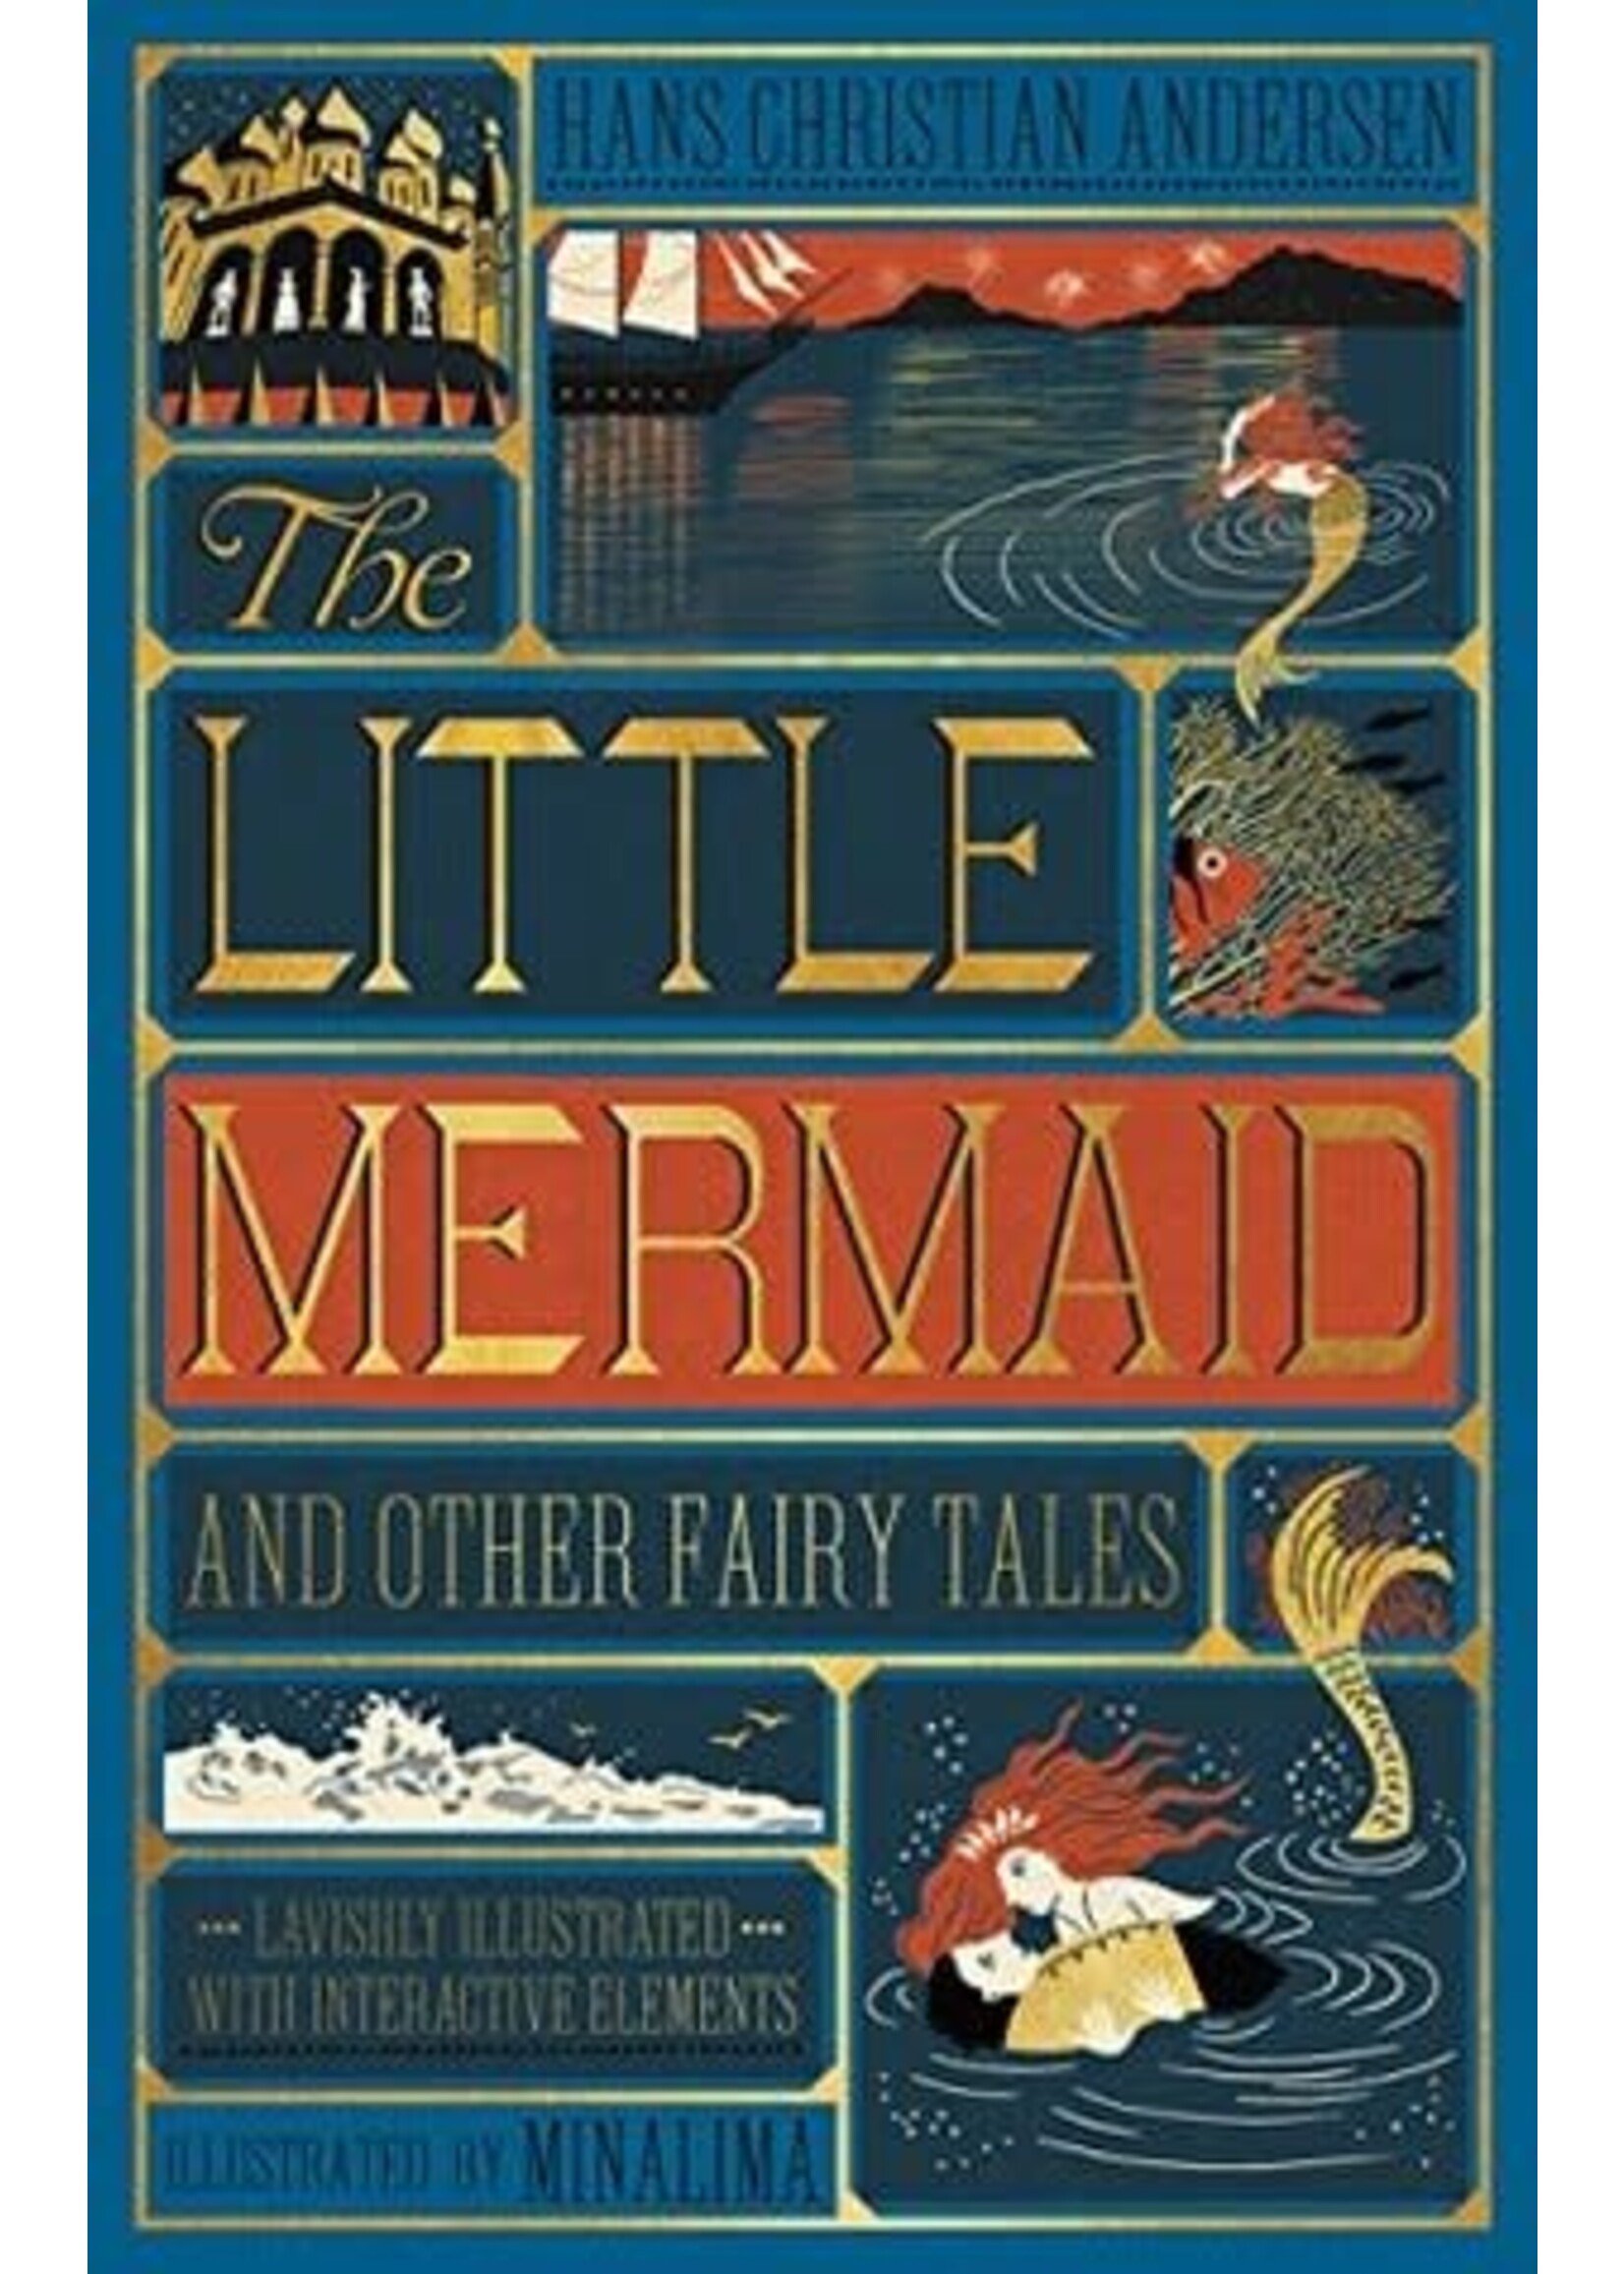 The Little Mermaid and Other Fairy Tales by Hans Christian Andersen, MinaLima